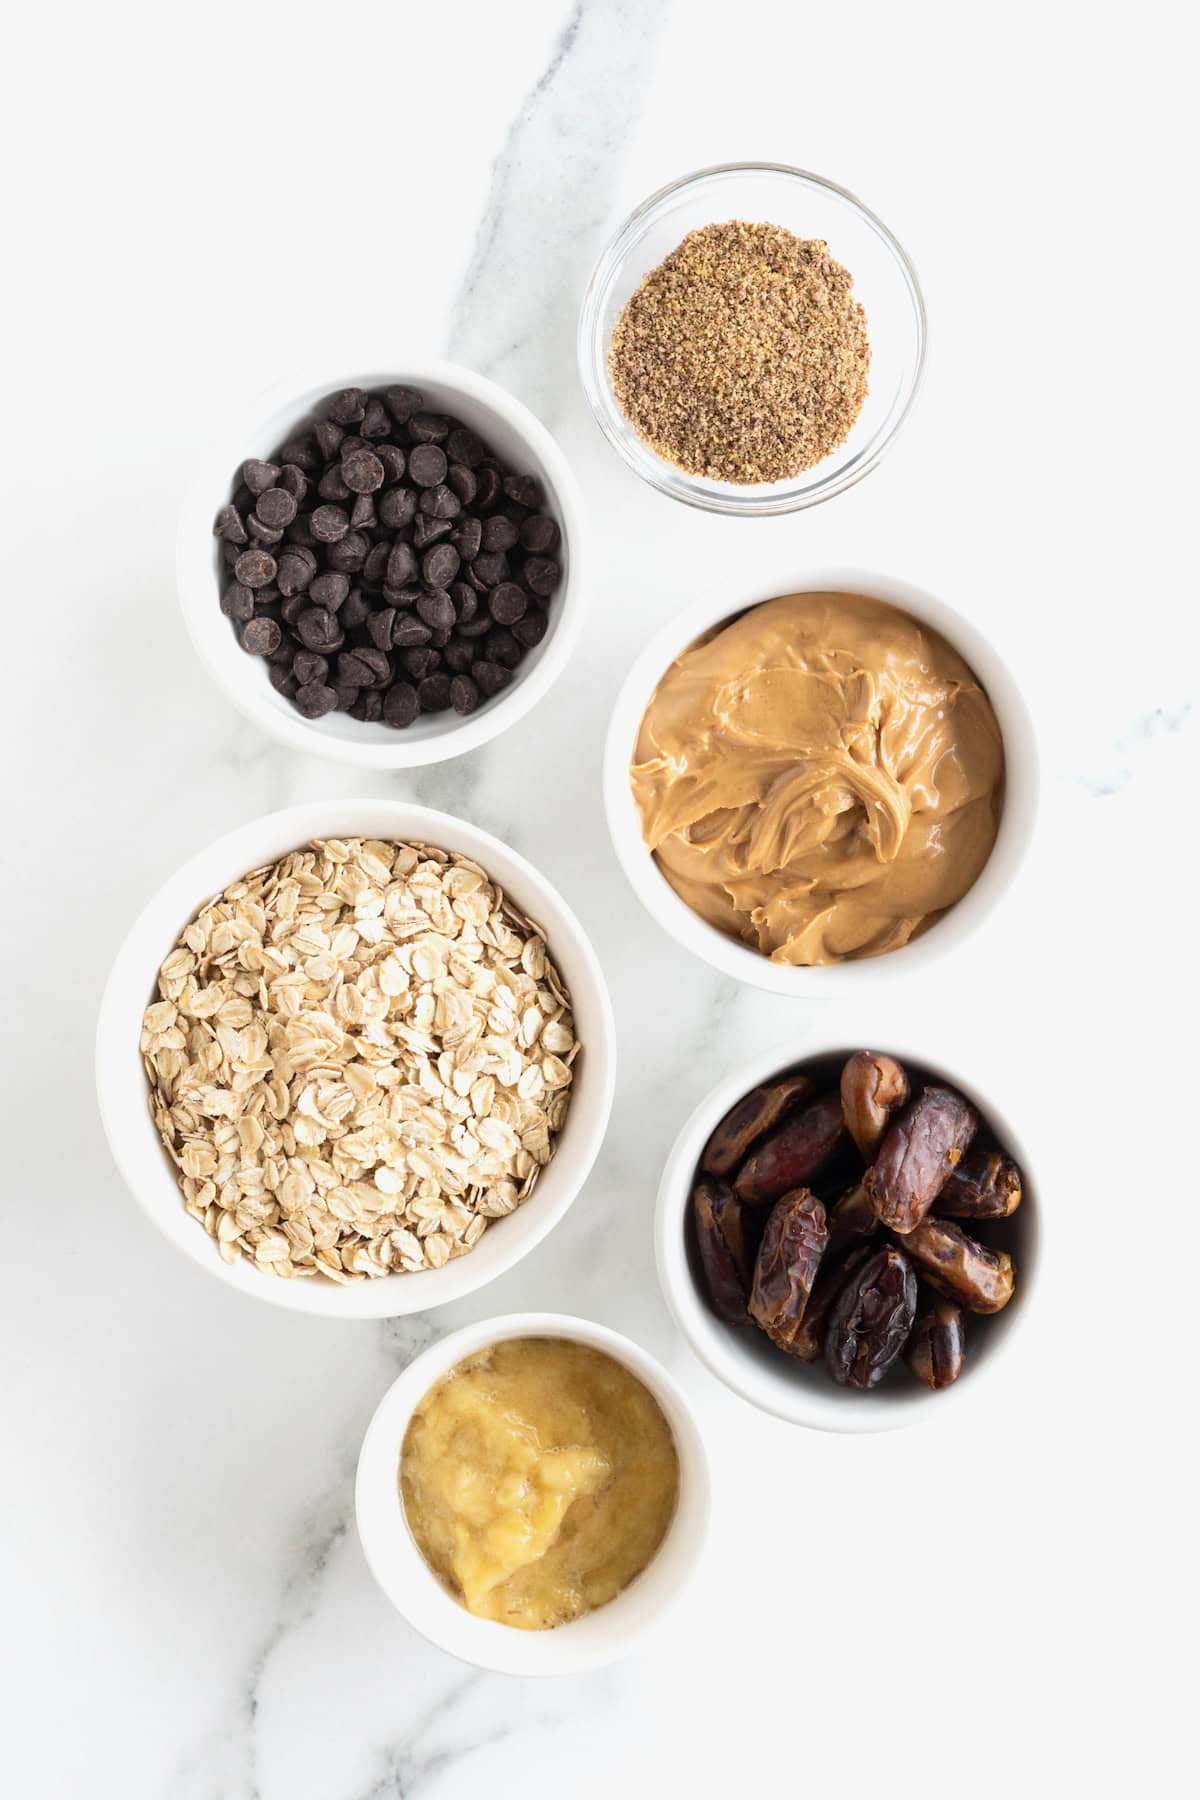 Ingredients to make peanut butter chocolate chip breakfast bars with dates and banana arranged in small white glass dishes on a white marble counter.